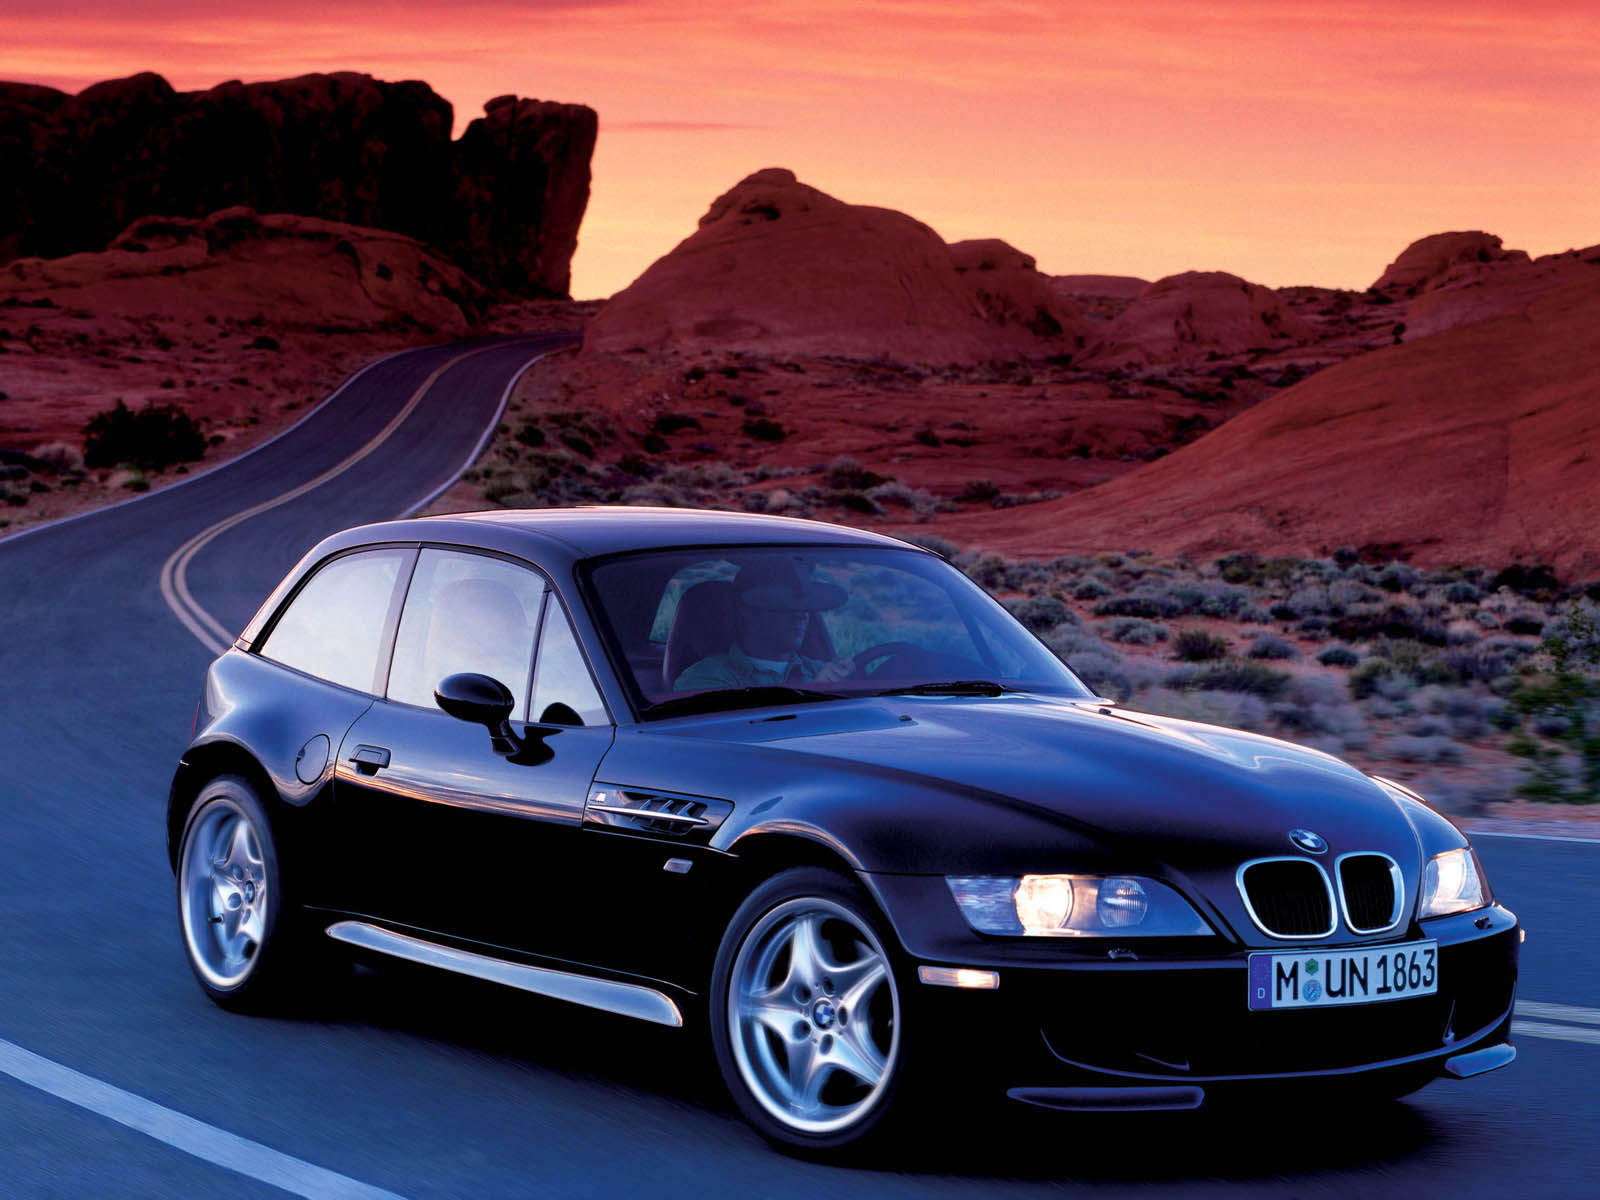 BMW Z3 M coupe. View Download Wallpaper. 1600x1200. Comments